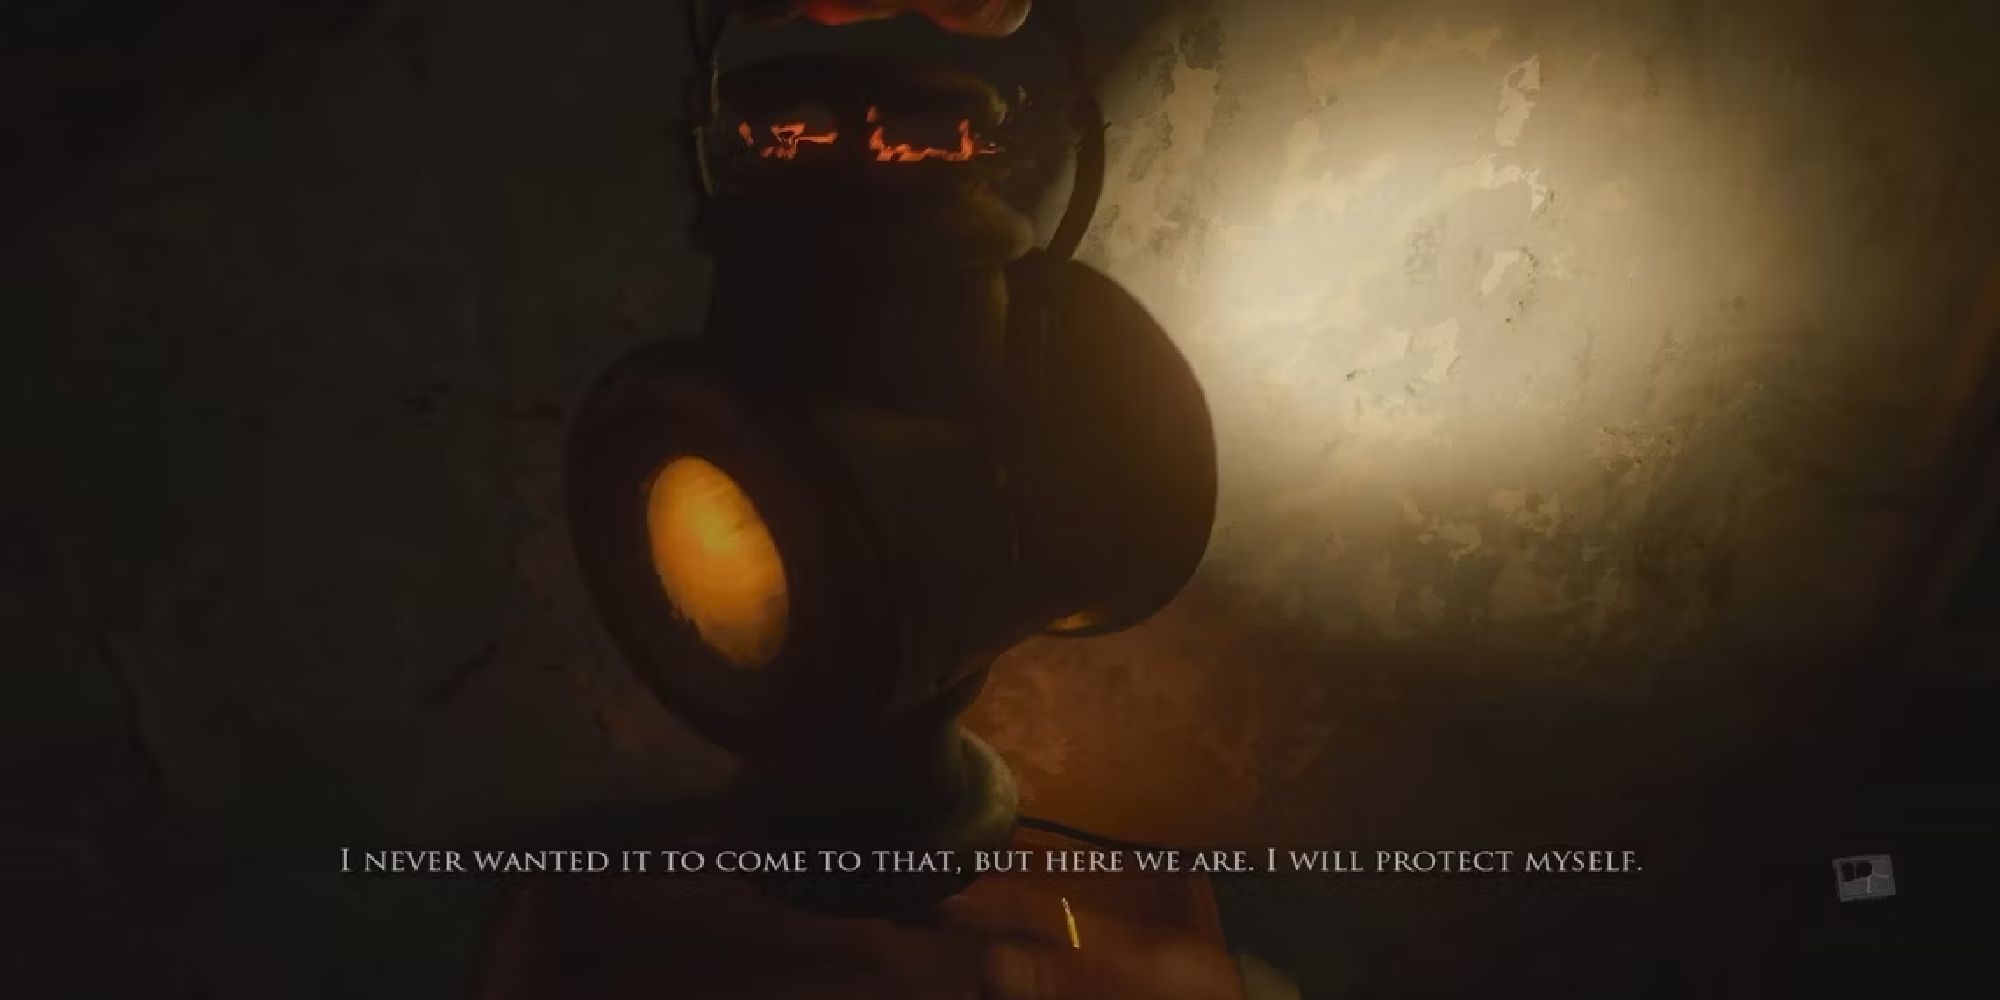 The player character picking up a lit lantern, with subtitles reading: I never wanted it to come to that, but here we are. I will protect myself".